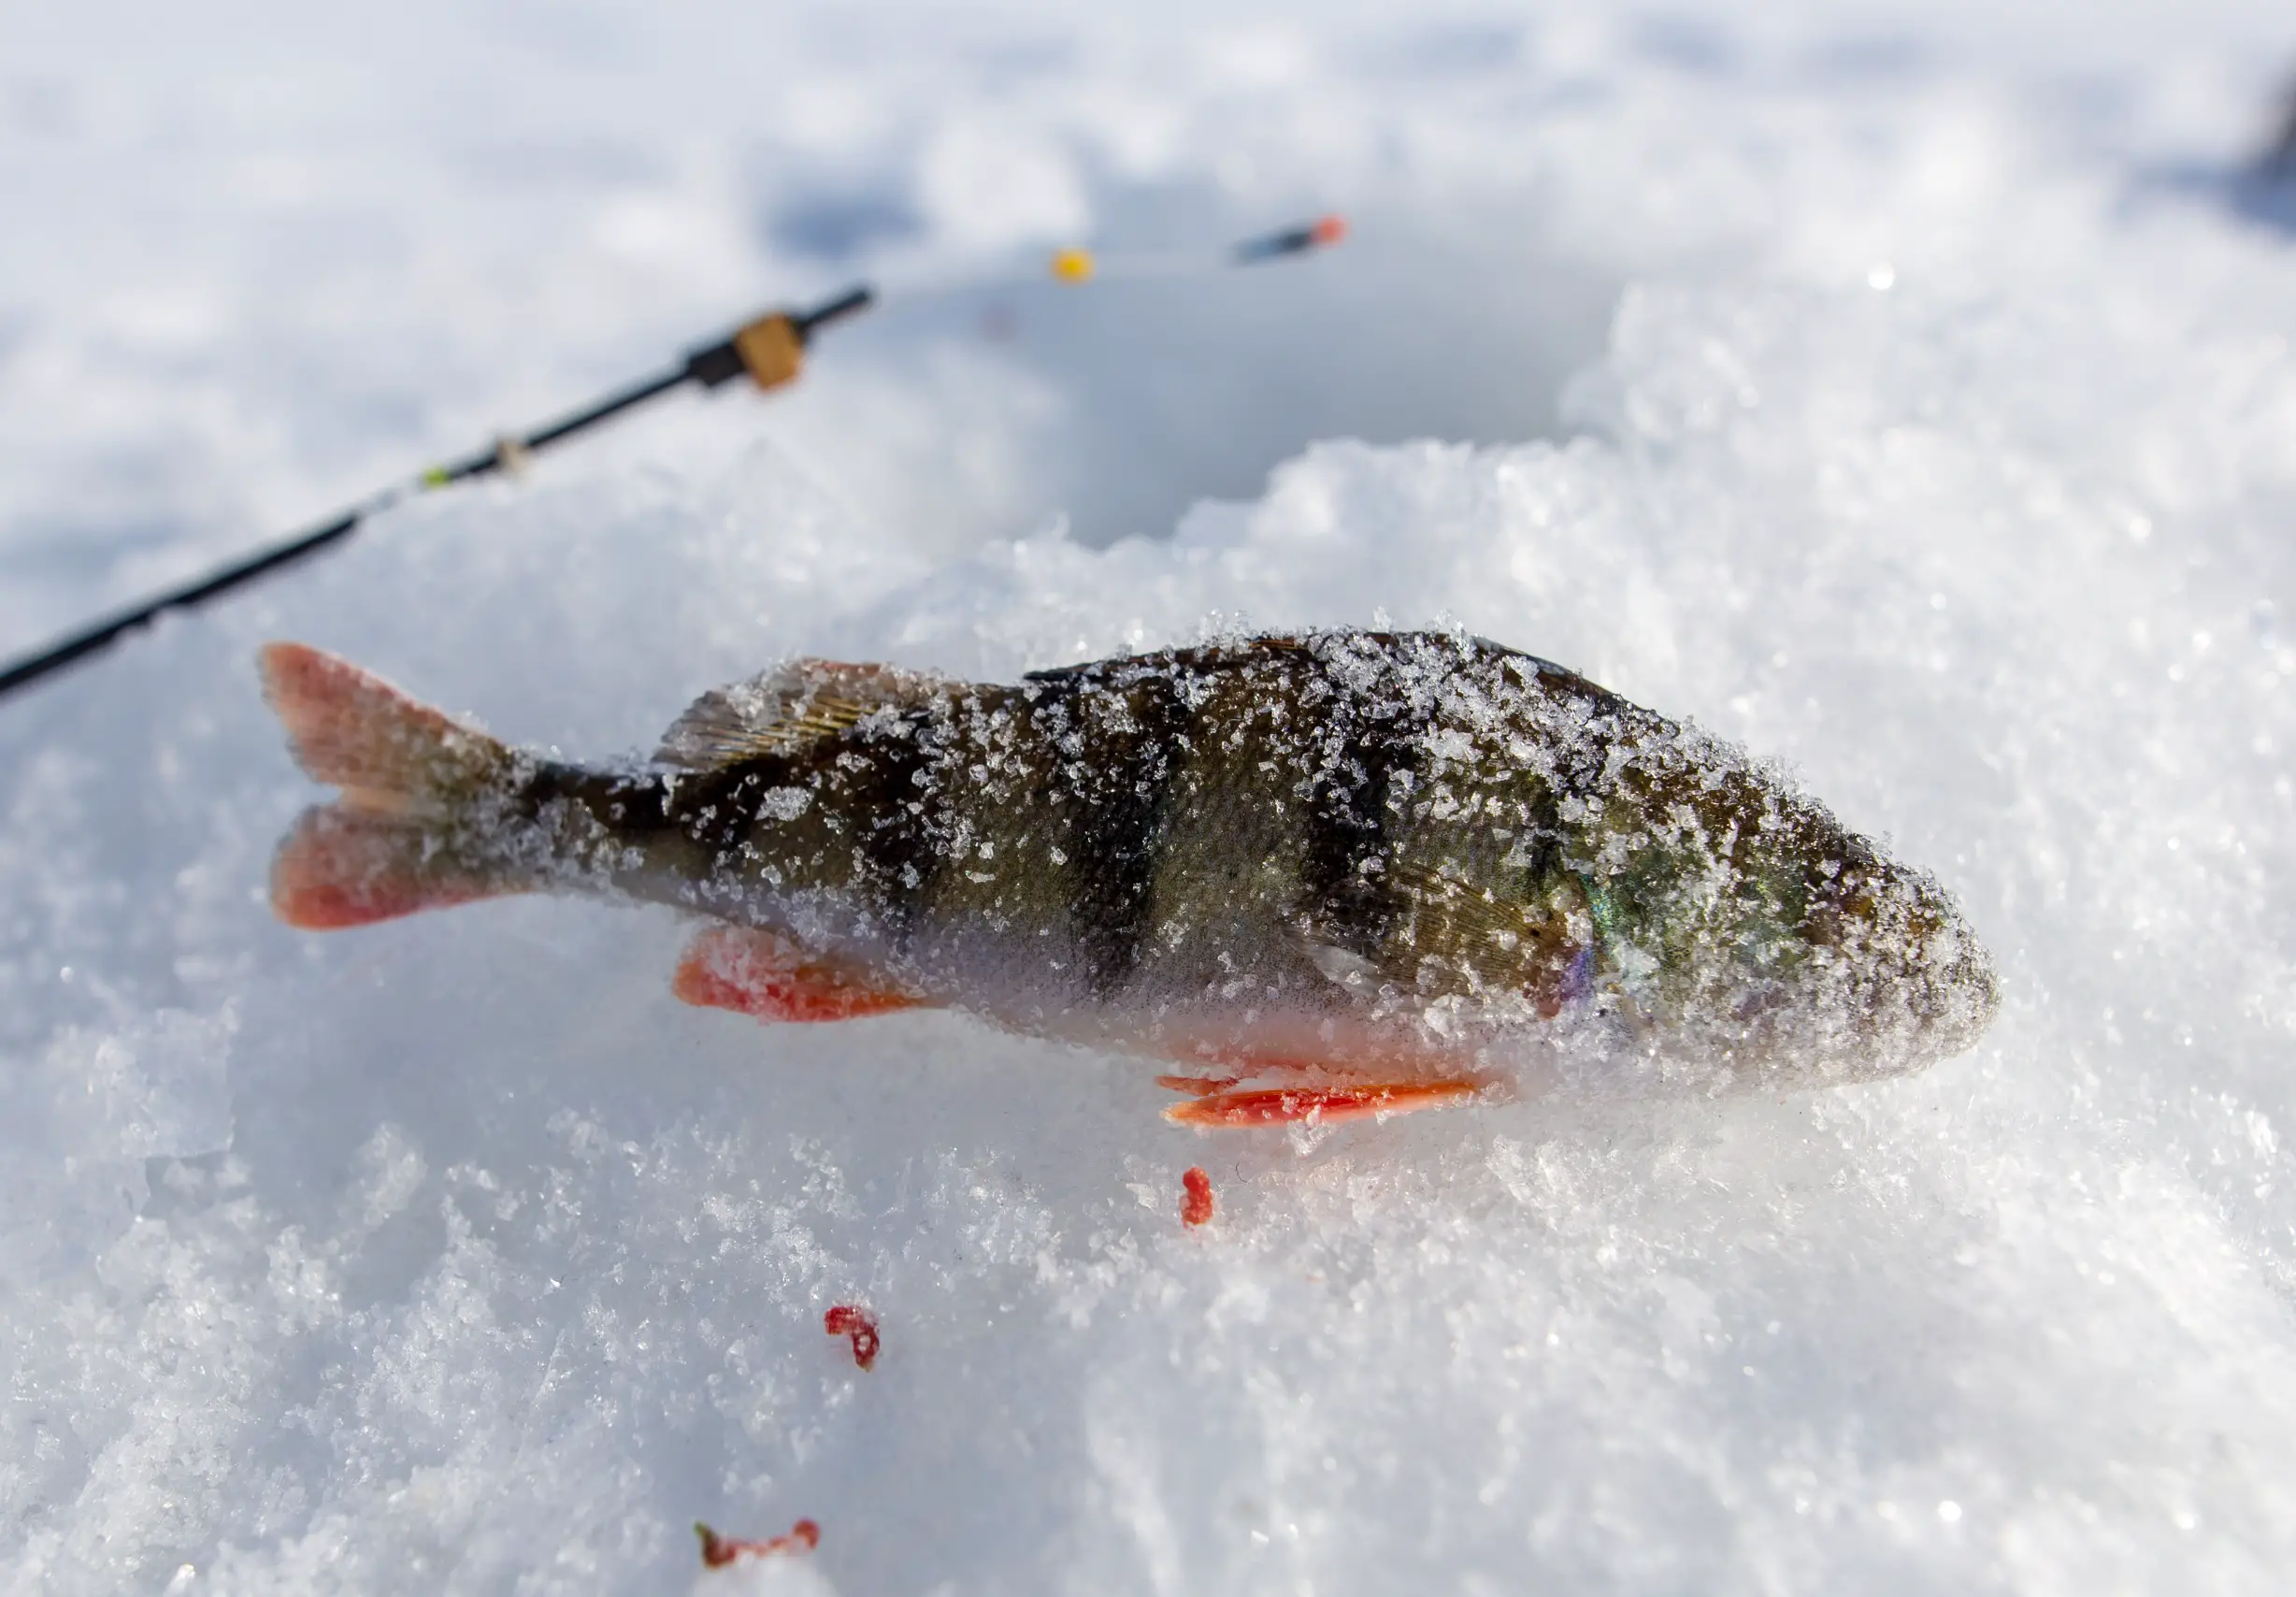 Frozen Perch which could be used a bait